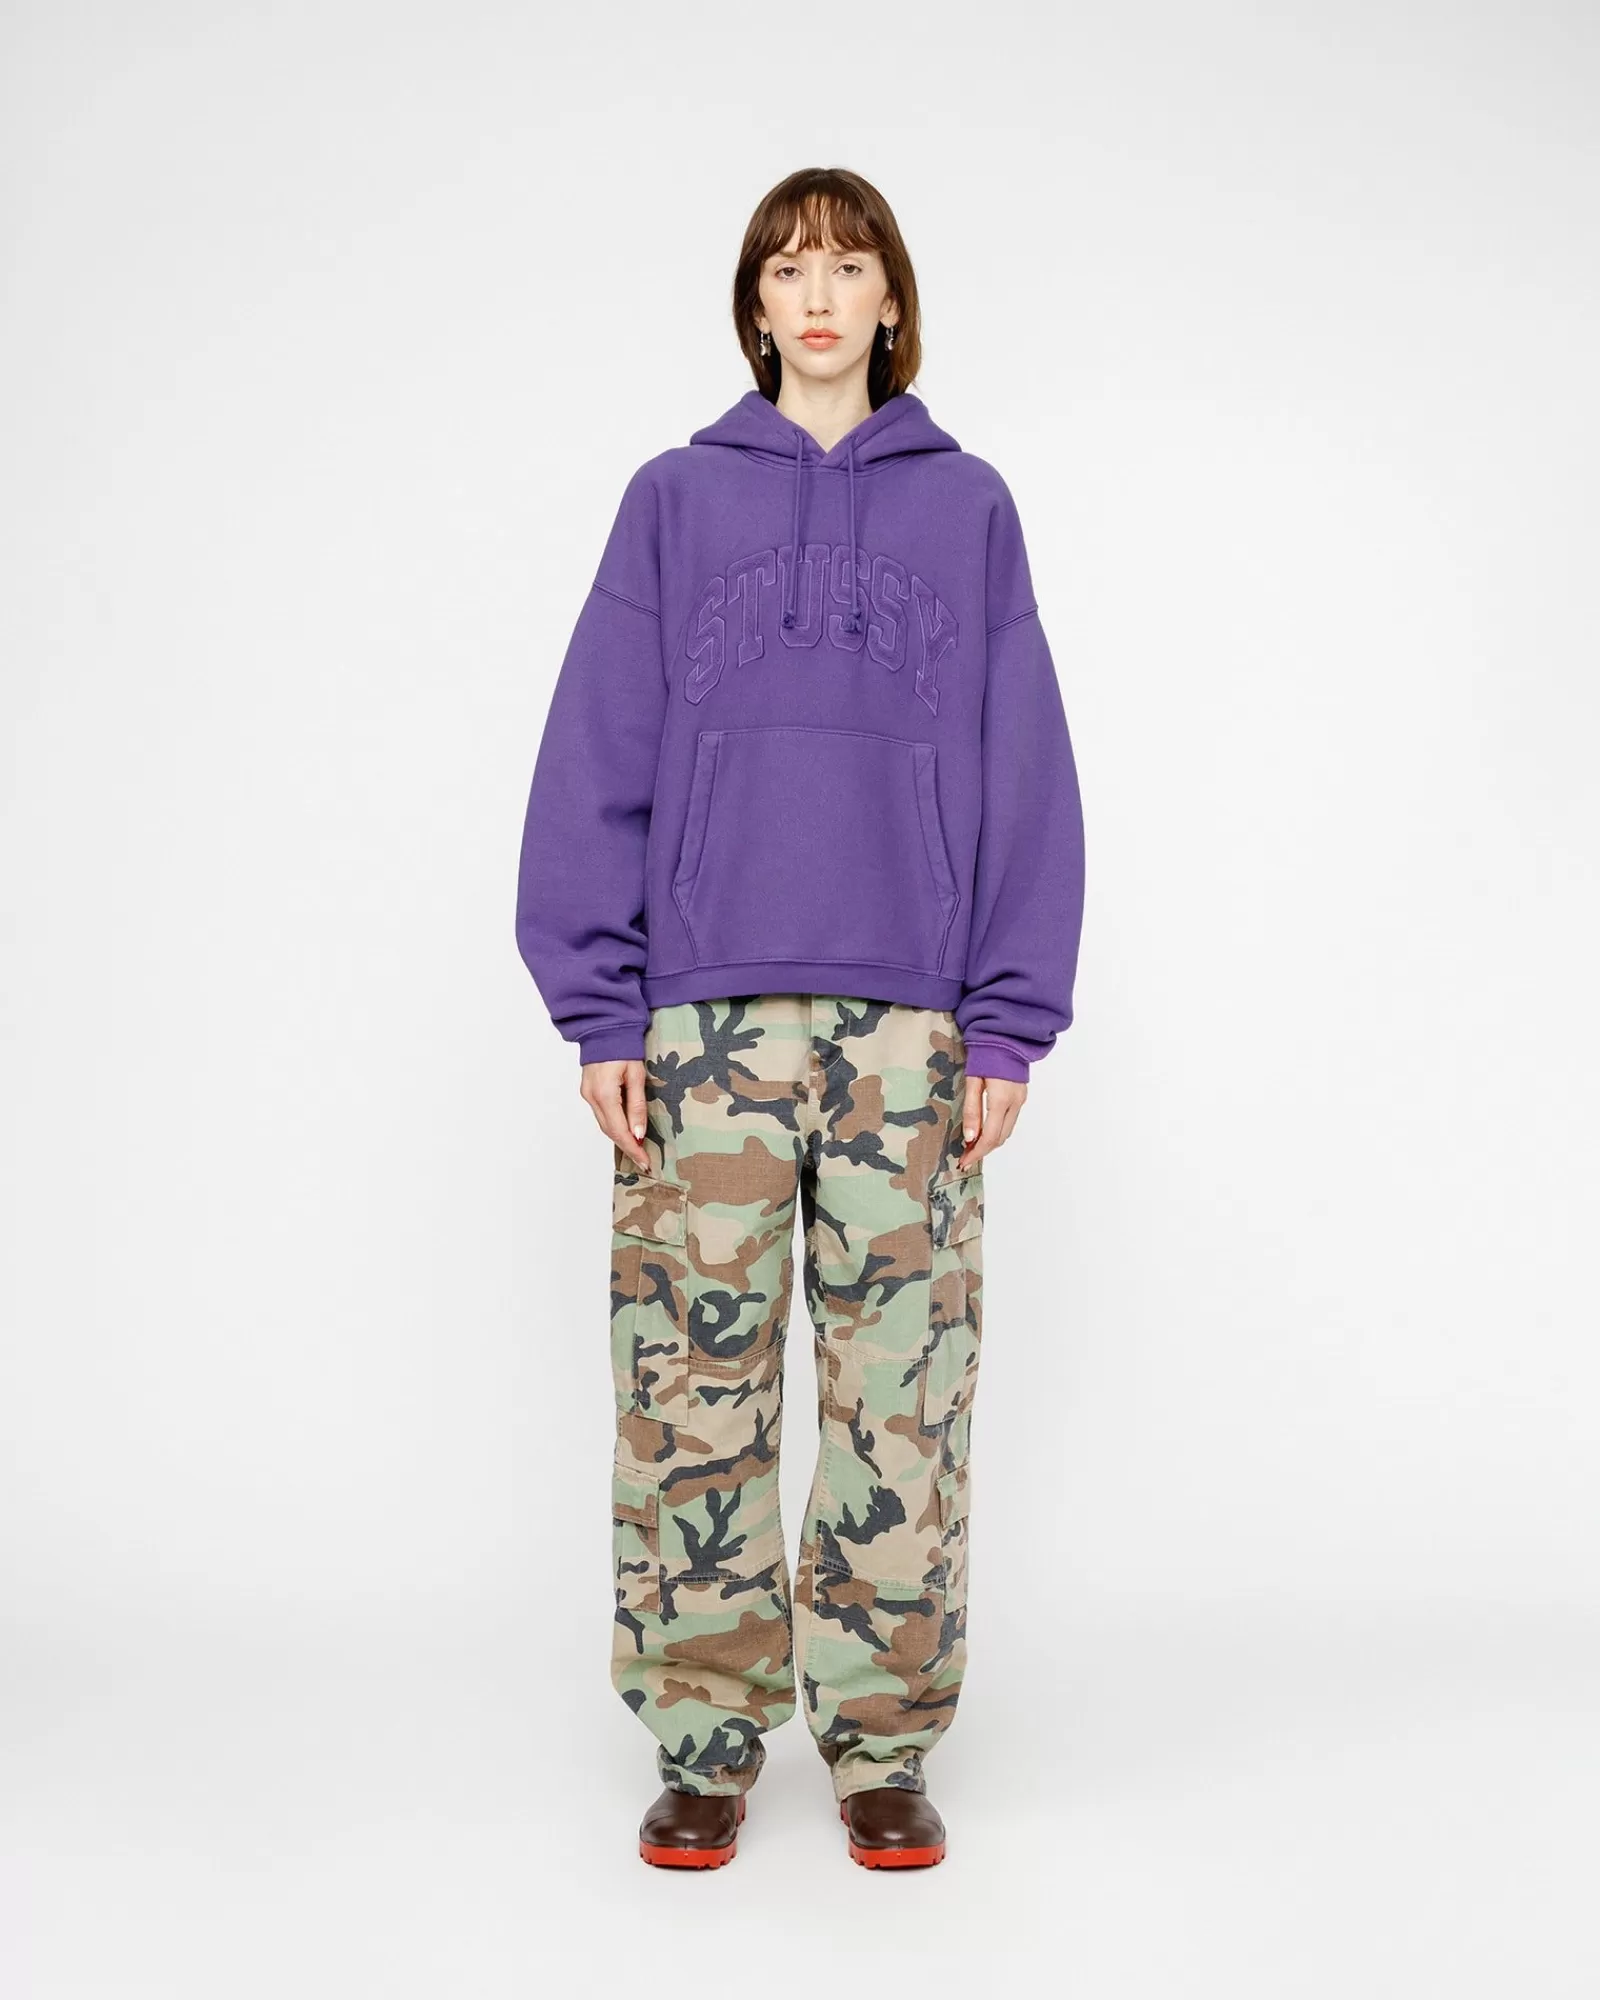 Stüssy Embroidered Relaxed Hoodie Cheap